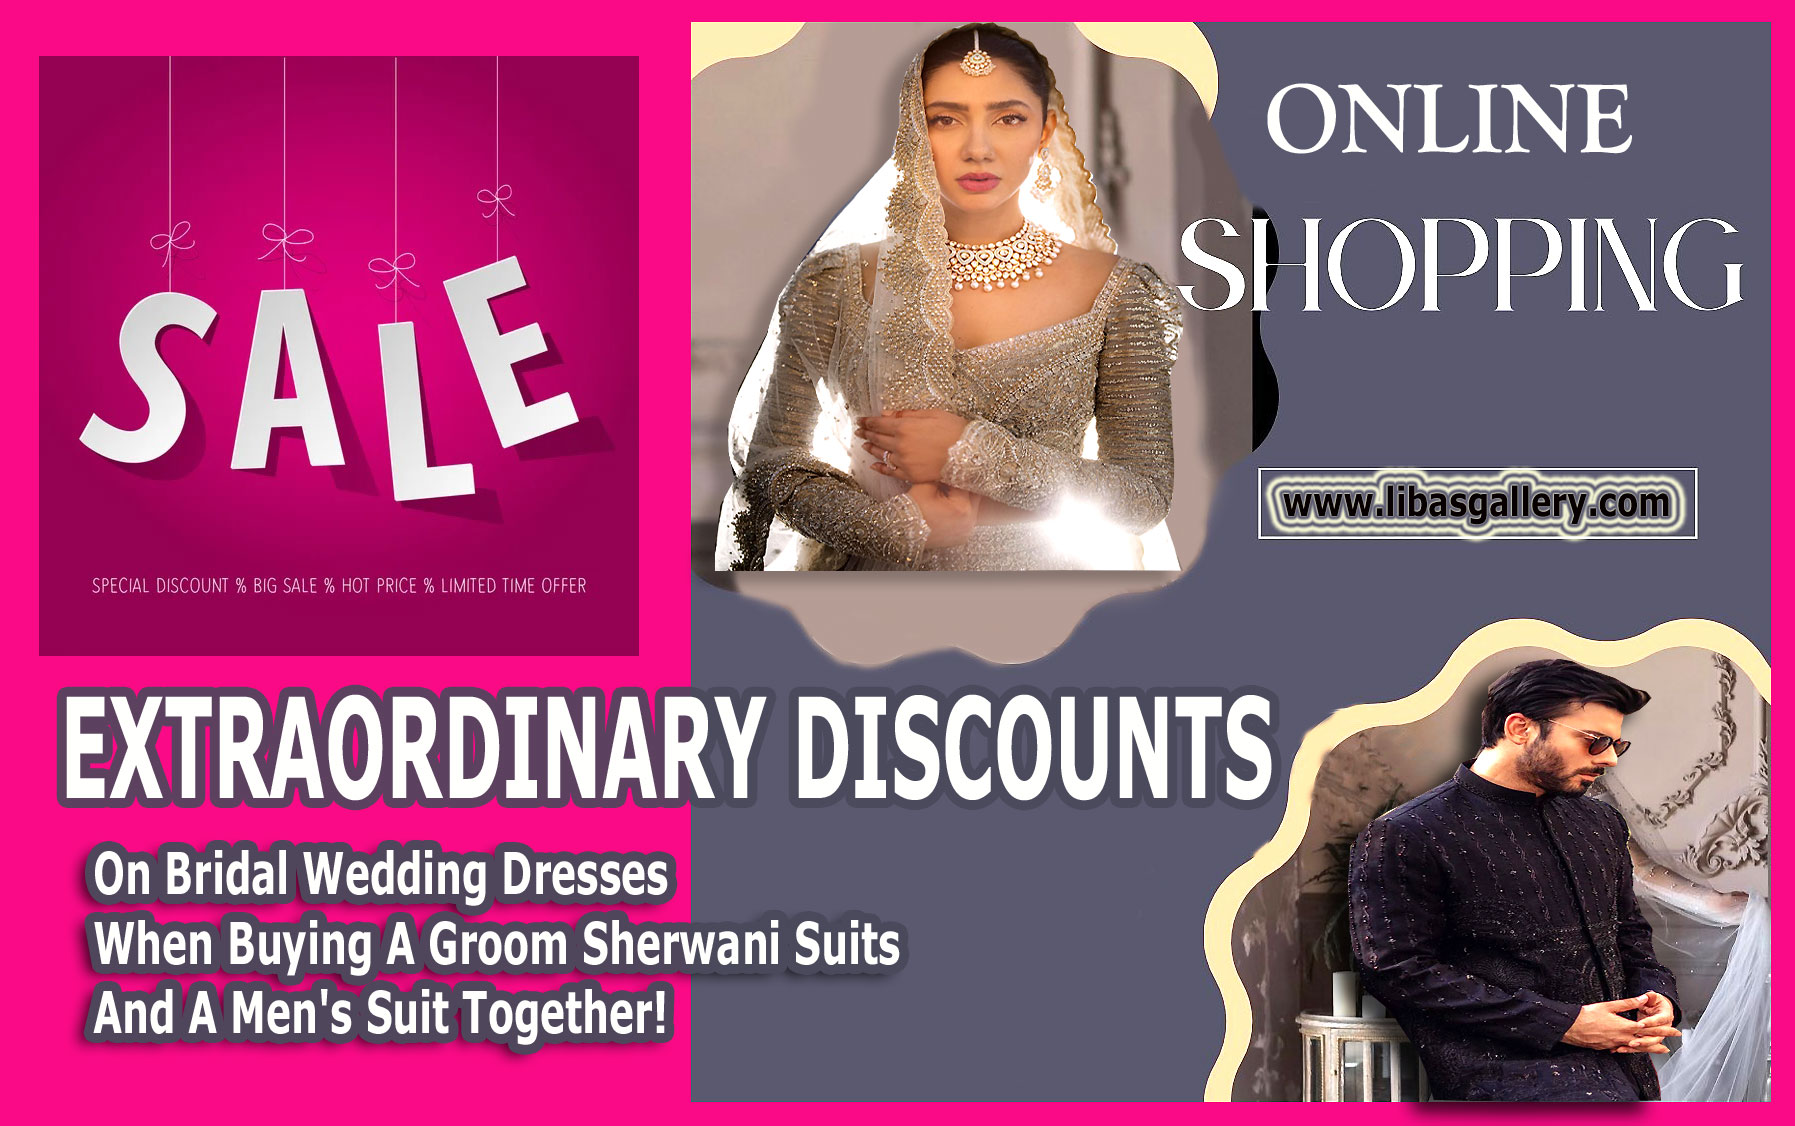 EXTRAORDINARY DISCOUNTS ON WEDDING DRESSES - Discount up to -30% when buying a wedding dress and a sherwani suit together